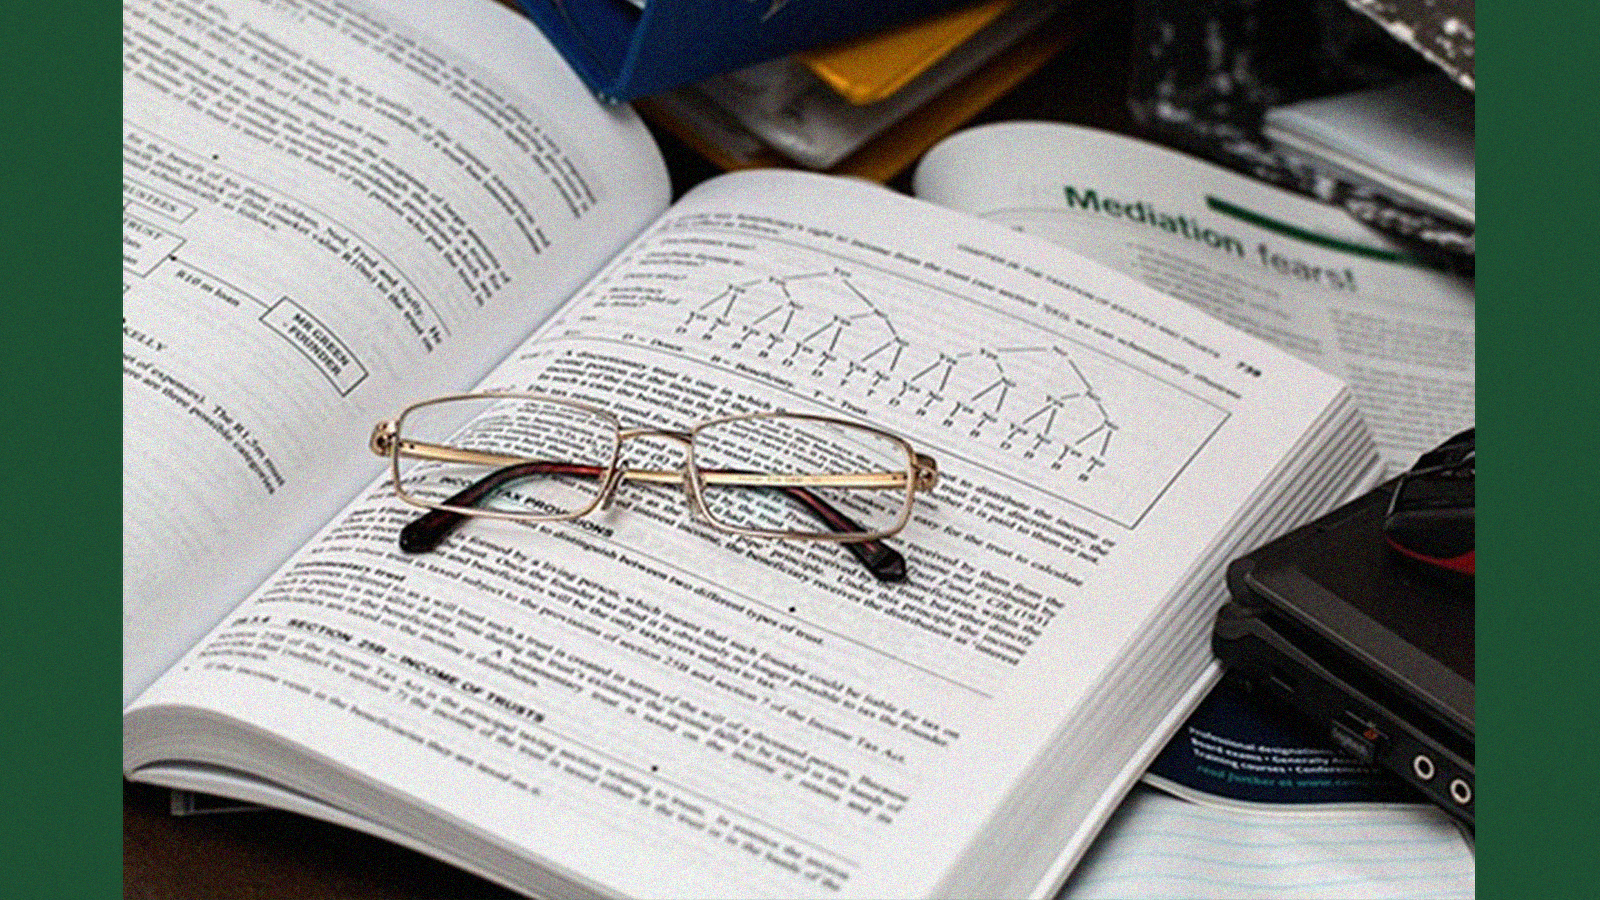 pair of glasses lying on a finance book